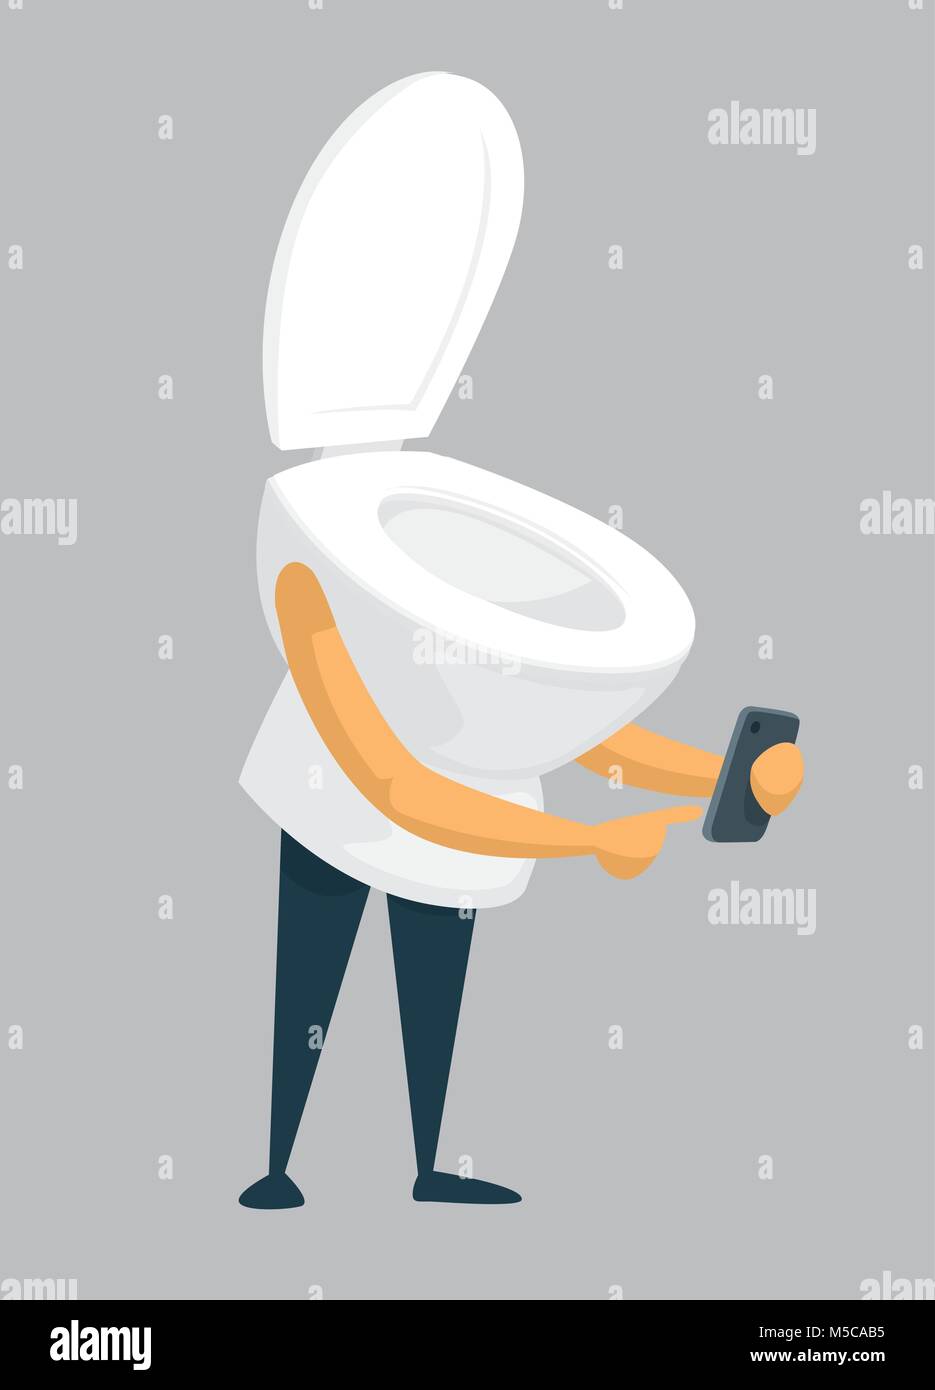 Cartoon illustration of toilet using a mobile phone Stock Vector